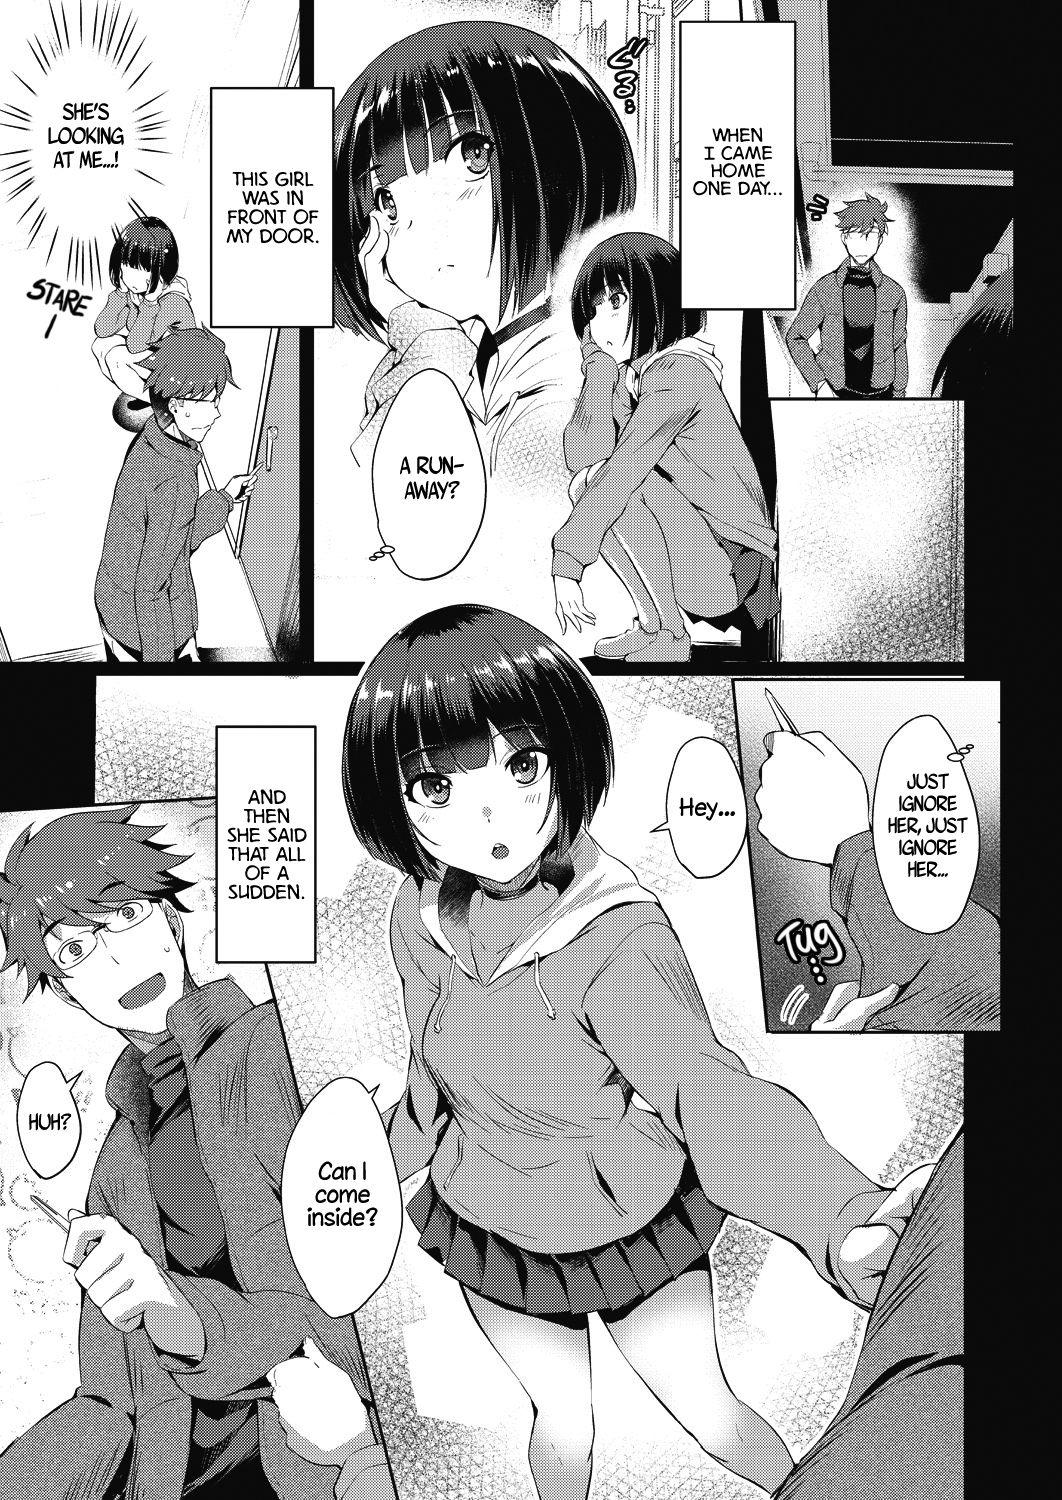 Butts Shion no Hana | Flowers for Shion Desperate - Page 3